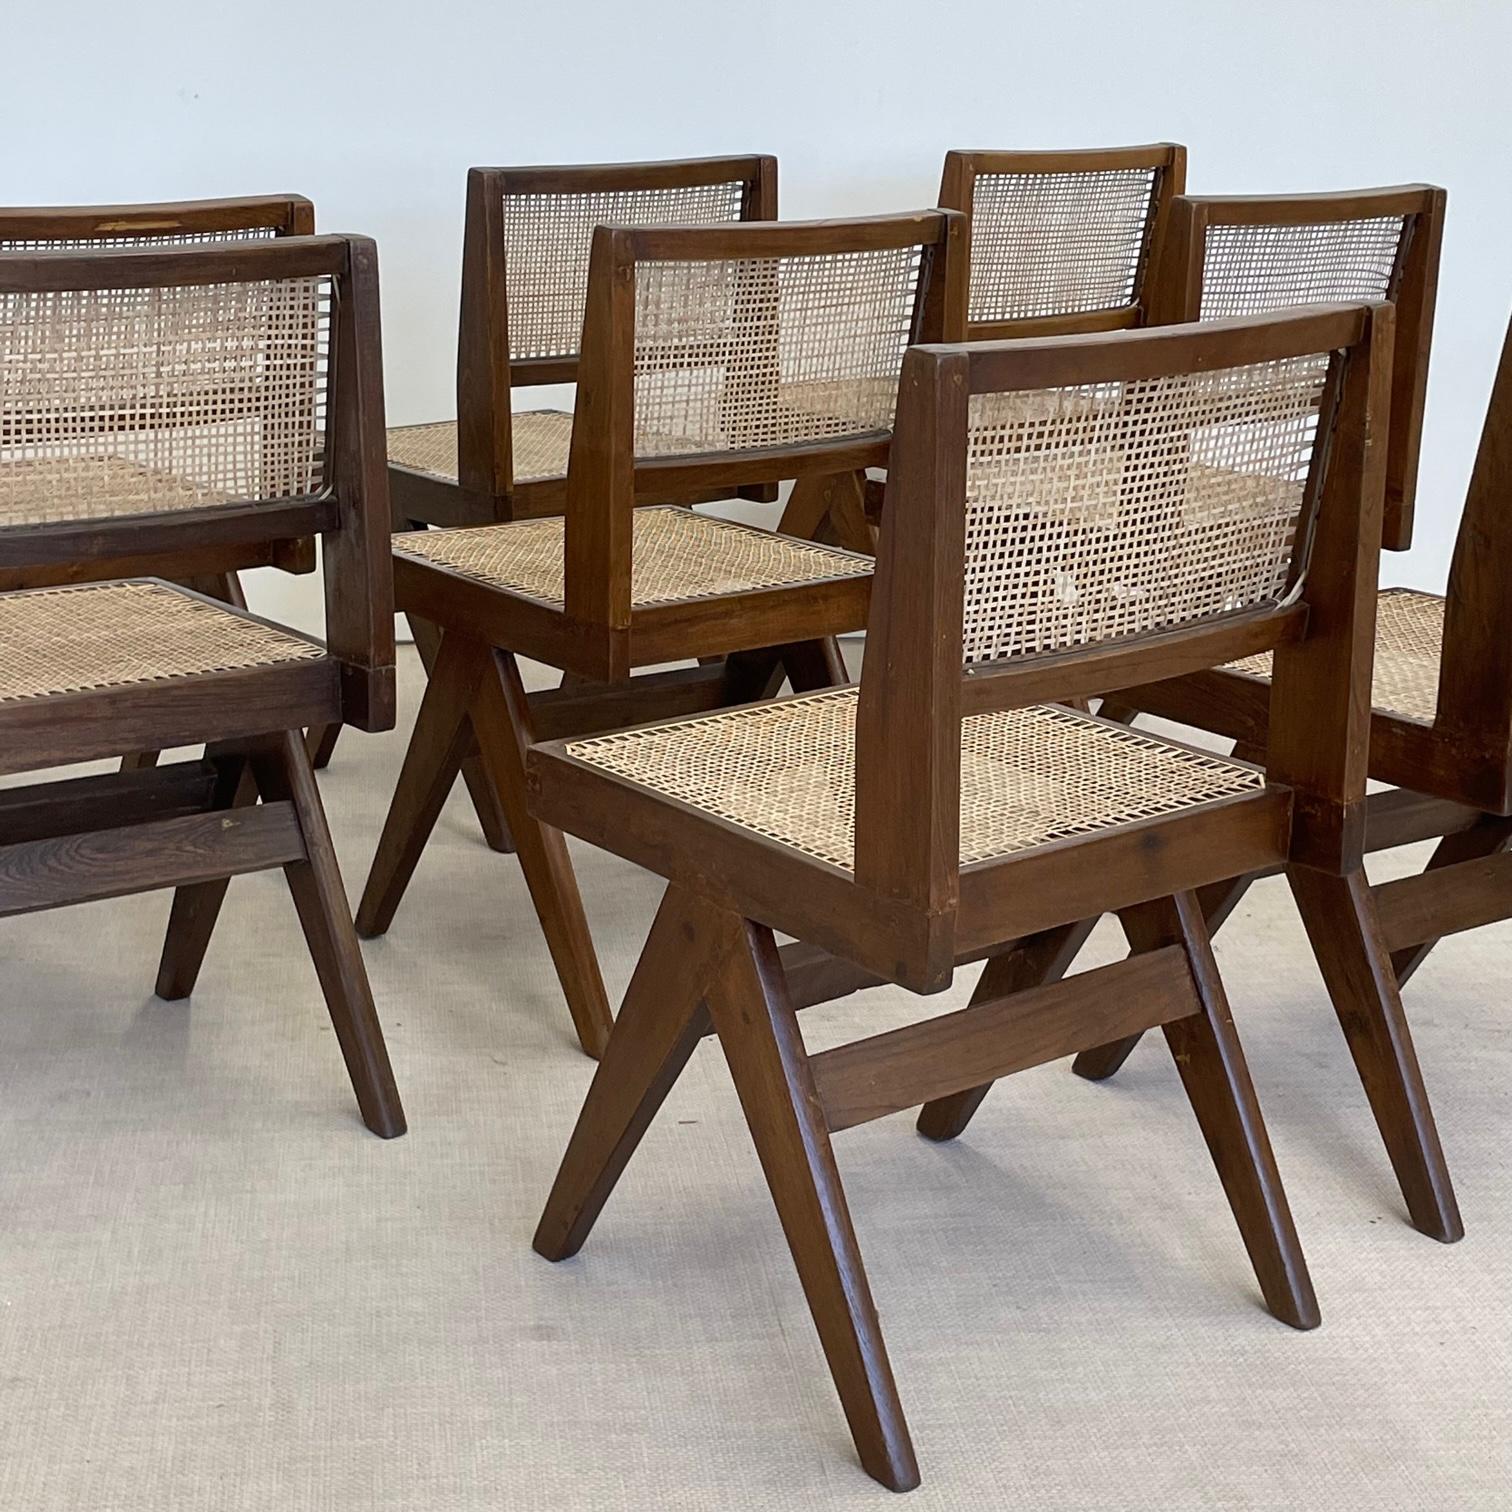 20th Century 10 Pierre Jeanneret Armless Dining Chairs, Teak, Cane, France/India